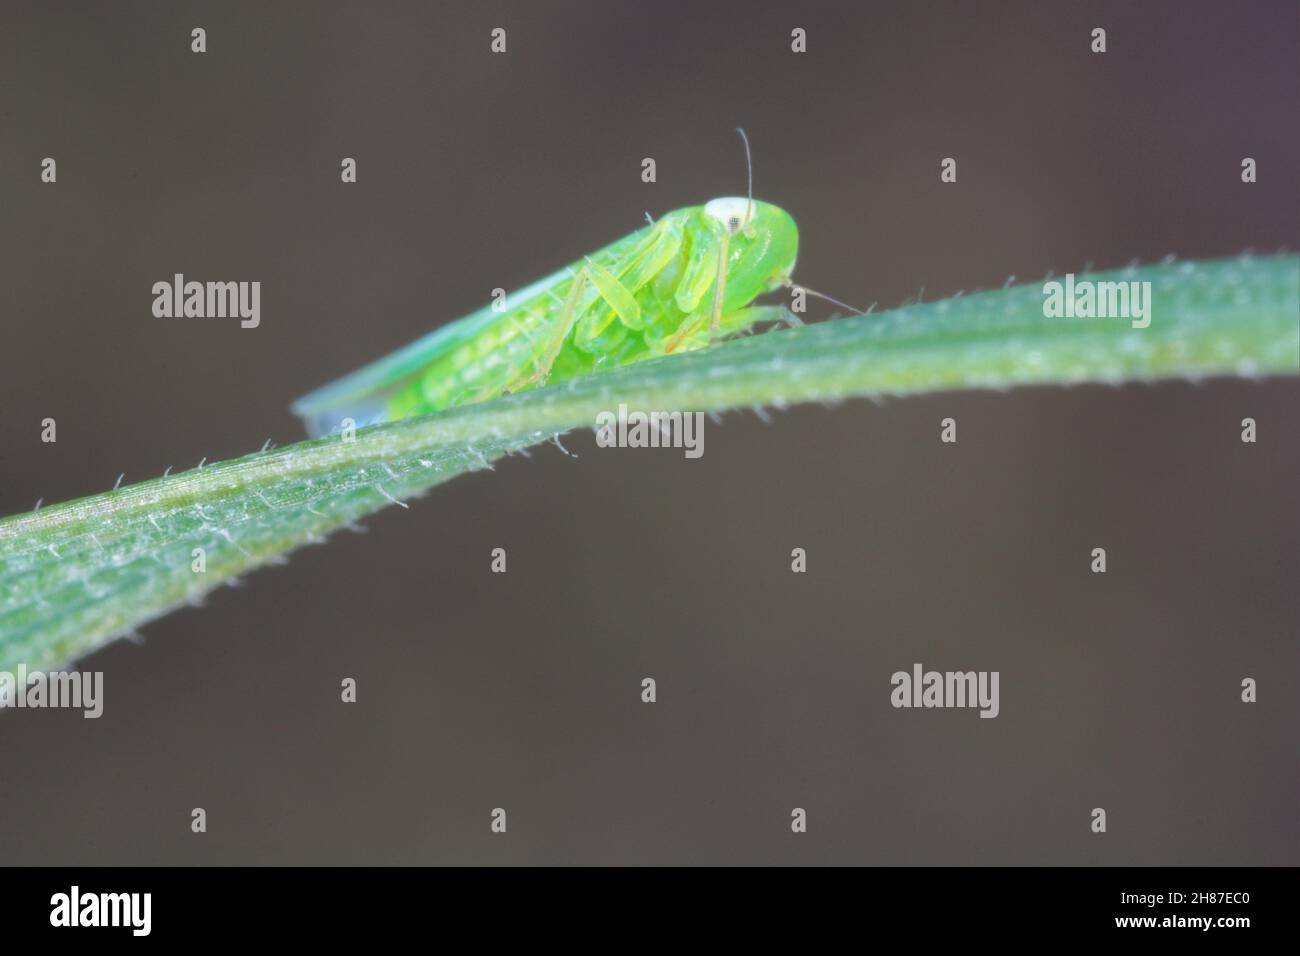 Potato leafhopper (Empoasca) belongs to family Cicadellidae. It is a pest of many types of Crops. Stock Photo